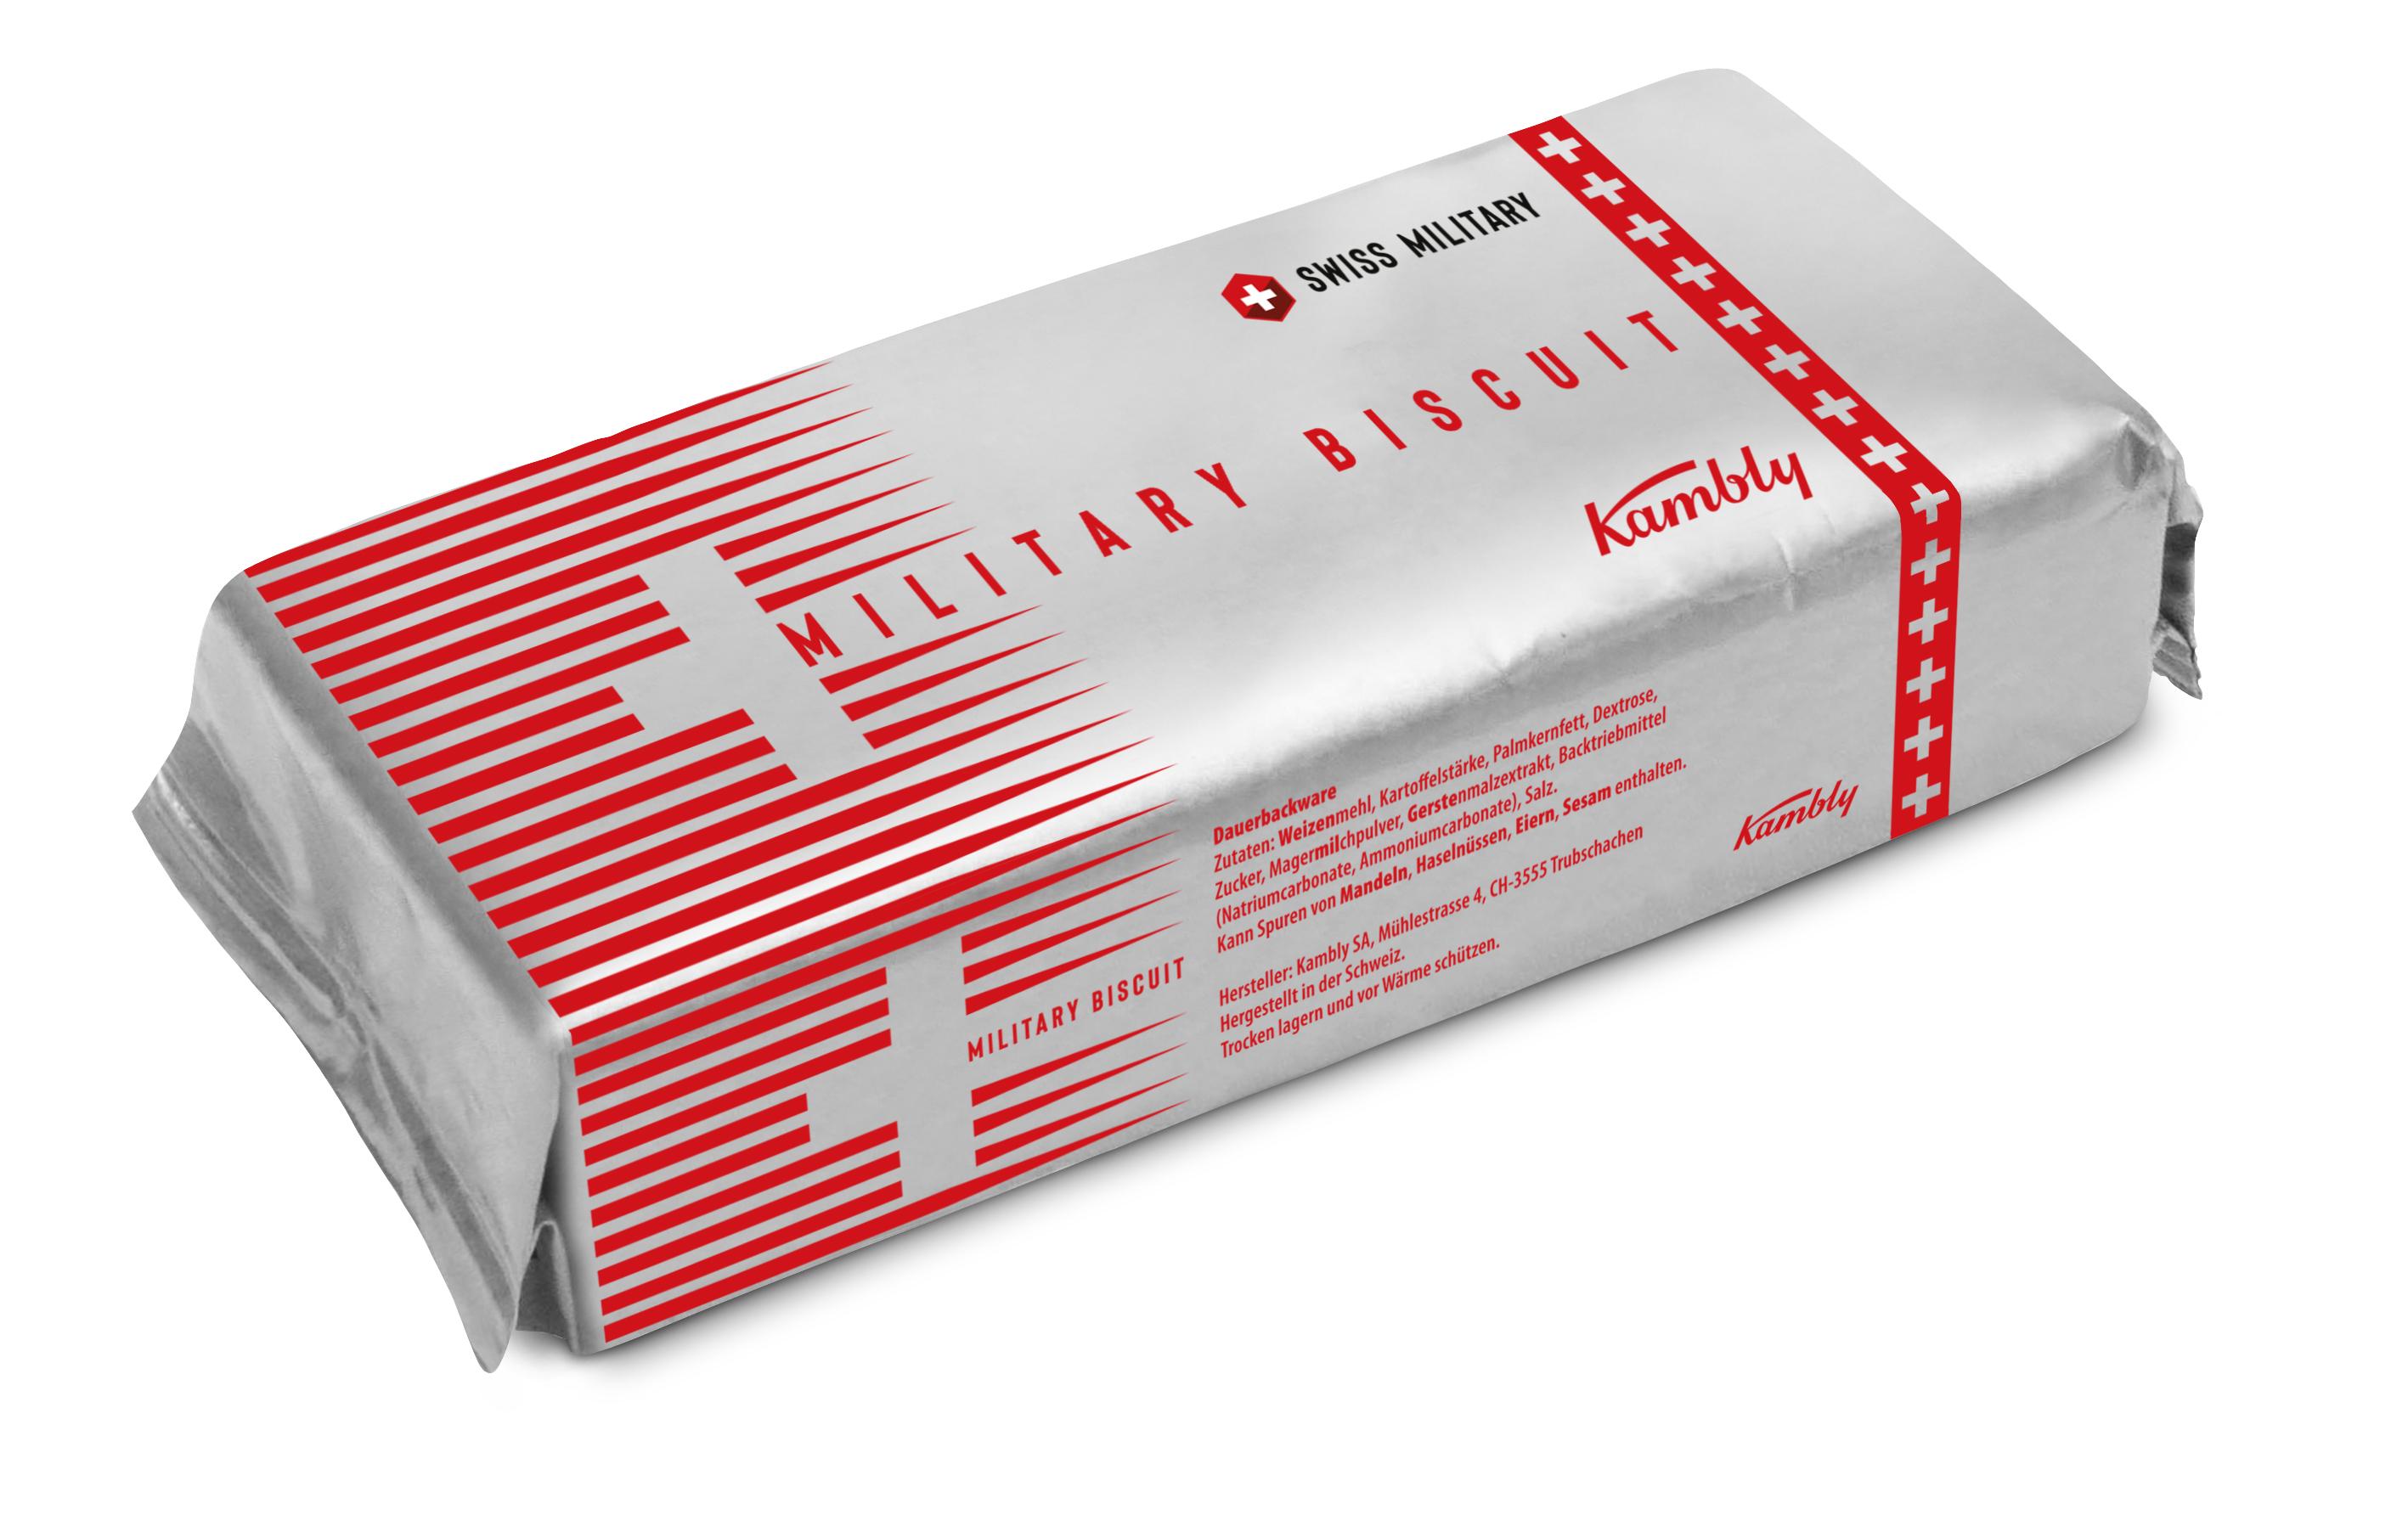 Kambly Guetzli Army-Biscuits 3 x 100 g